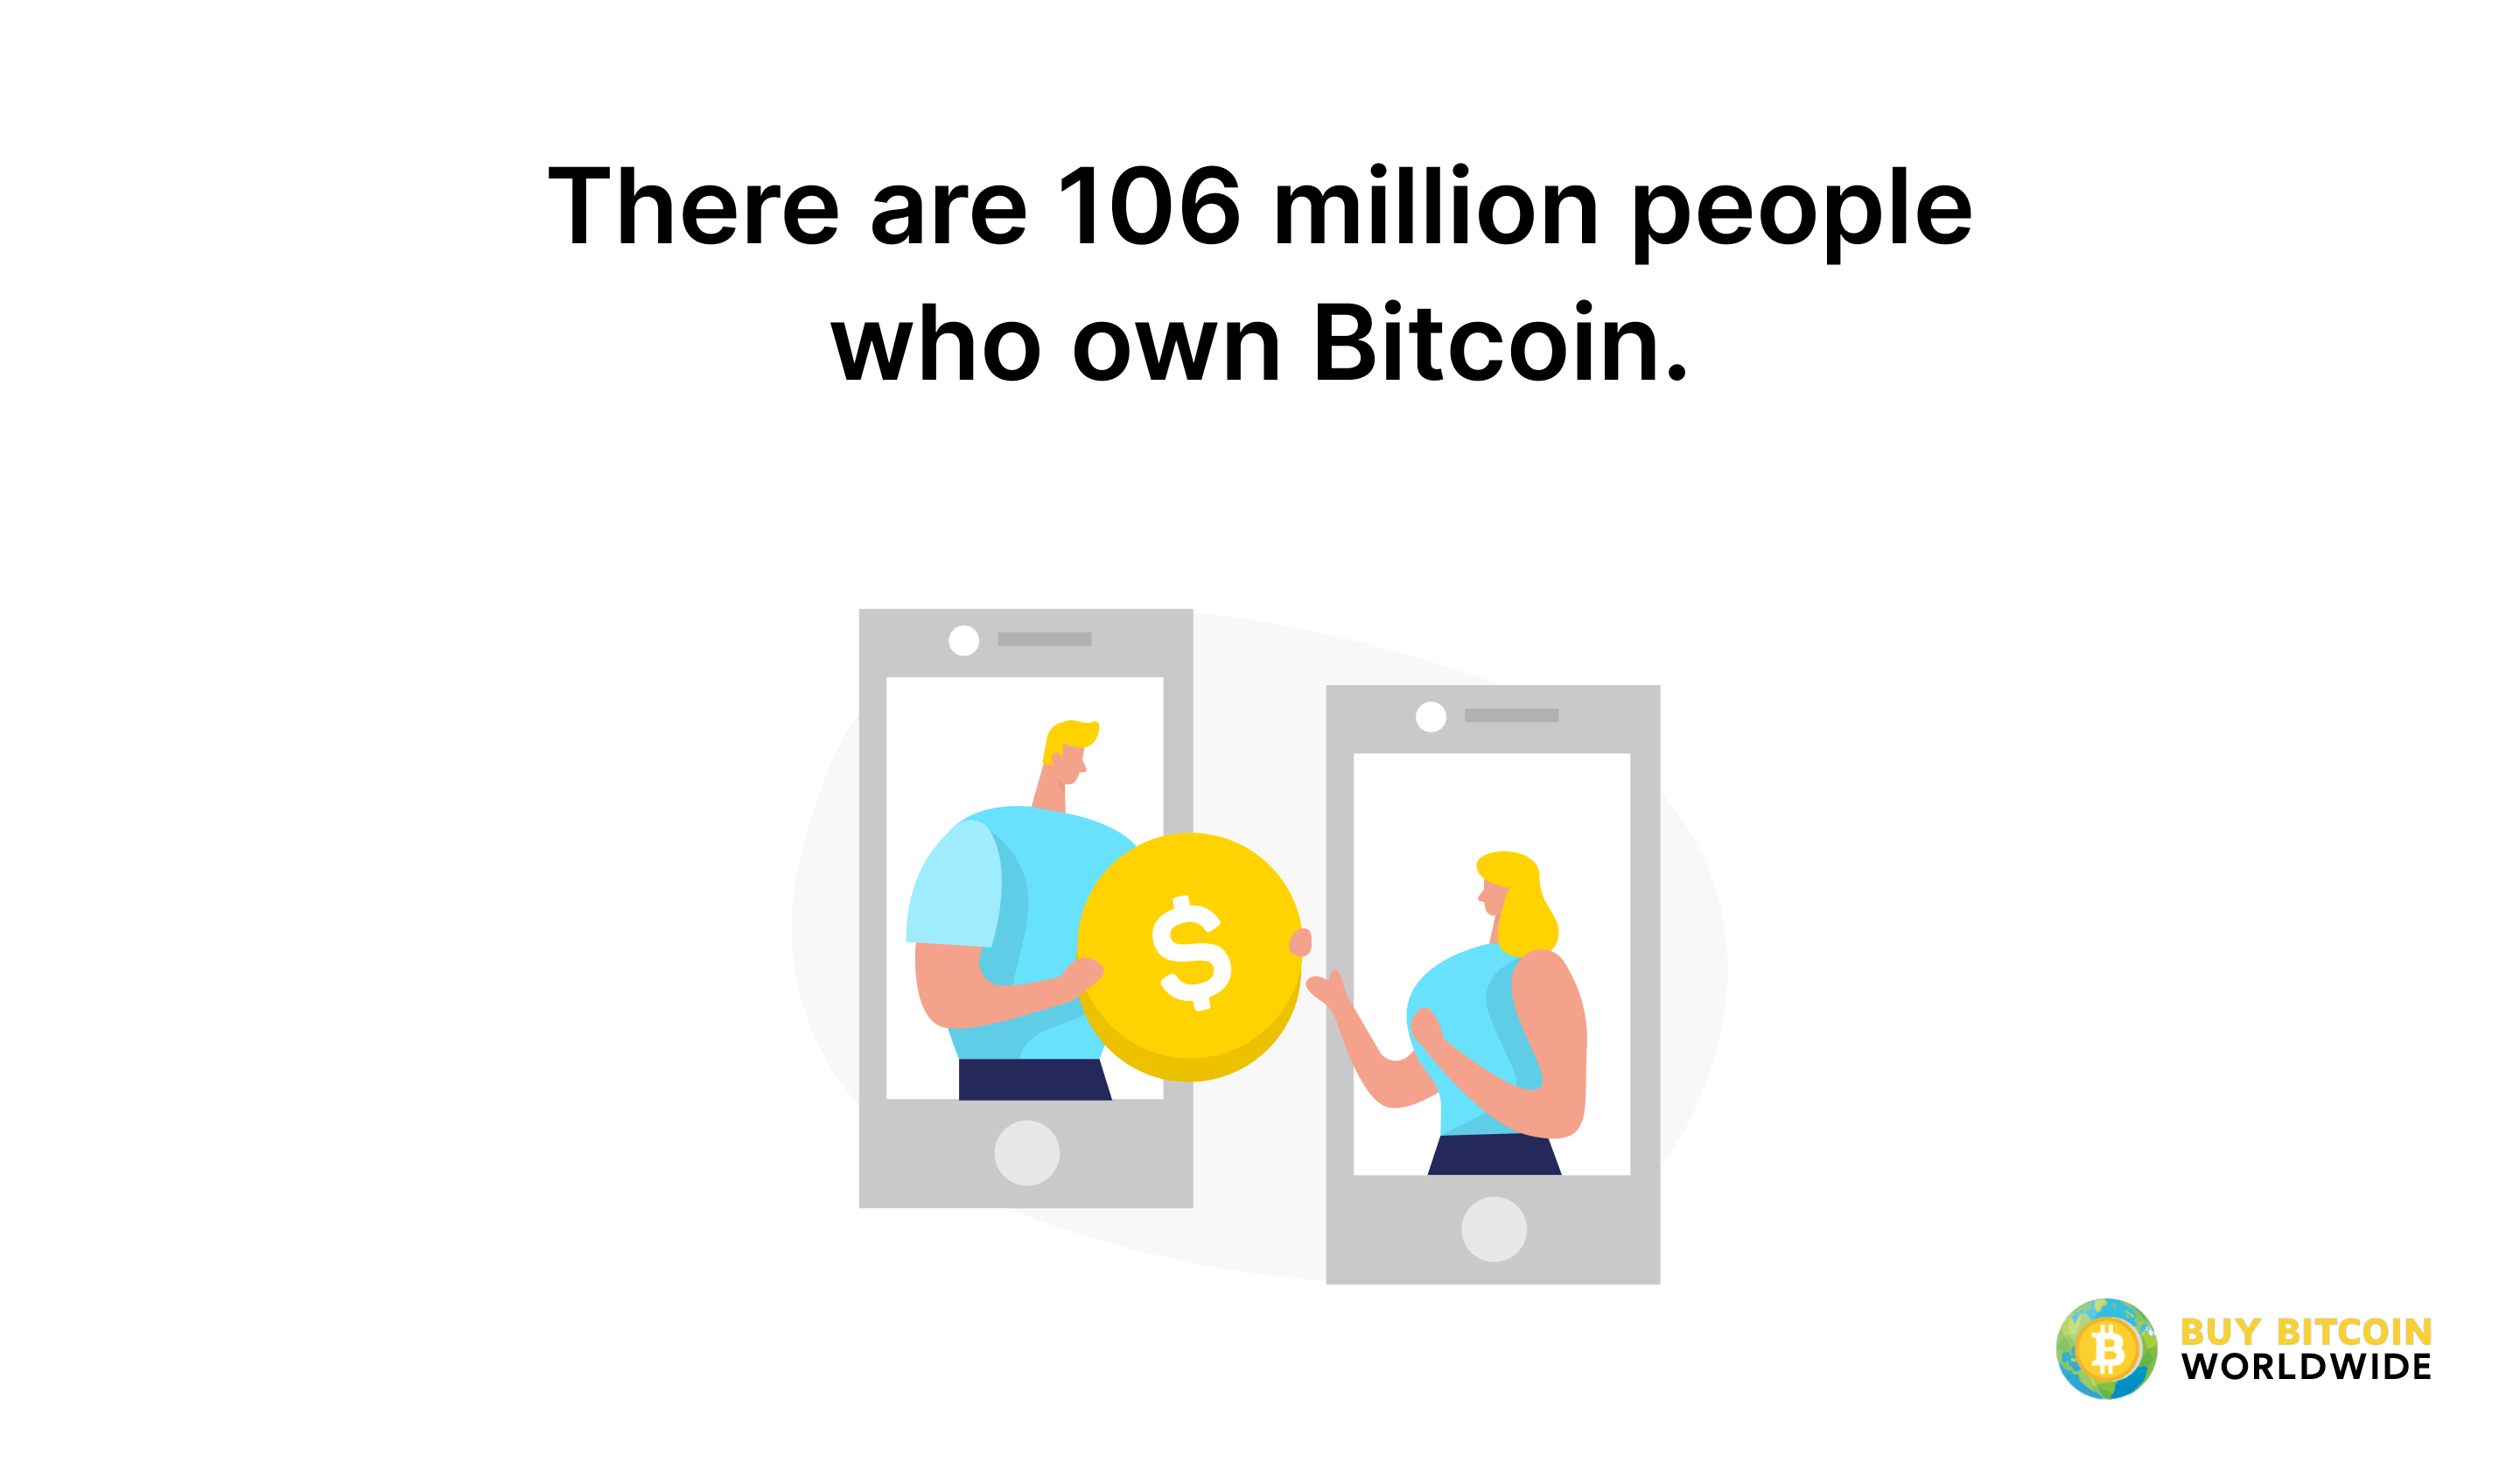 Only % of global population owns Bitcoin, representing every th person